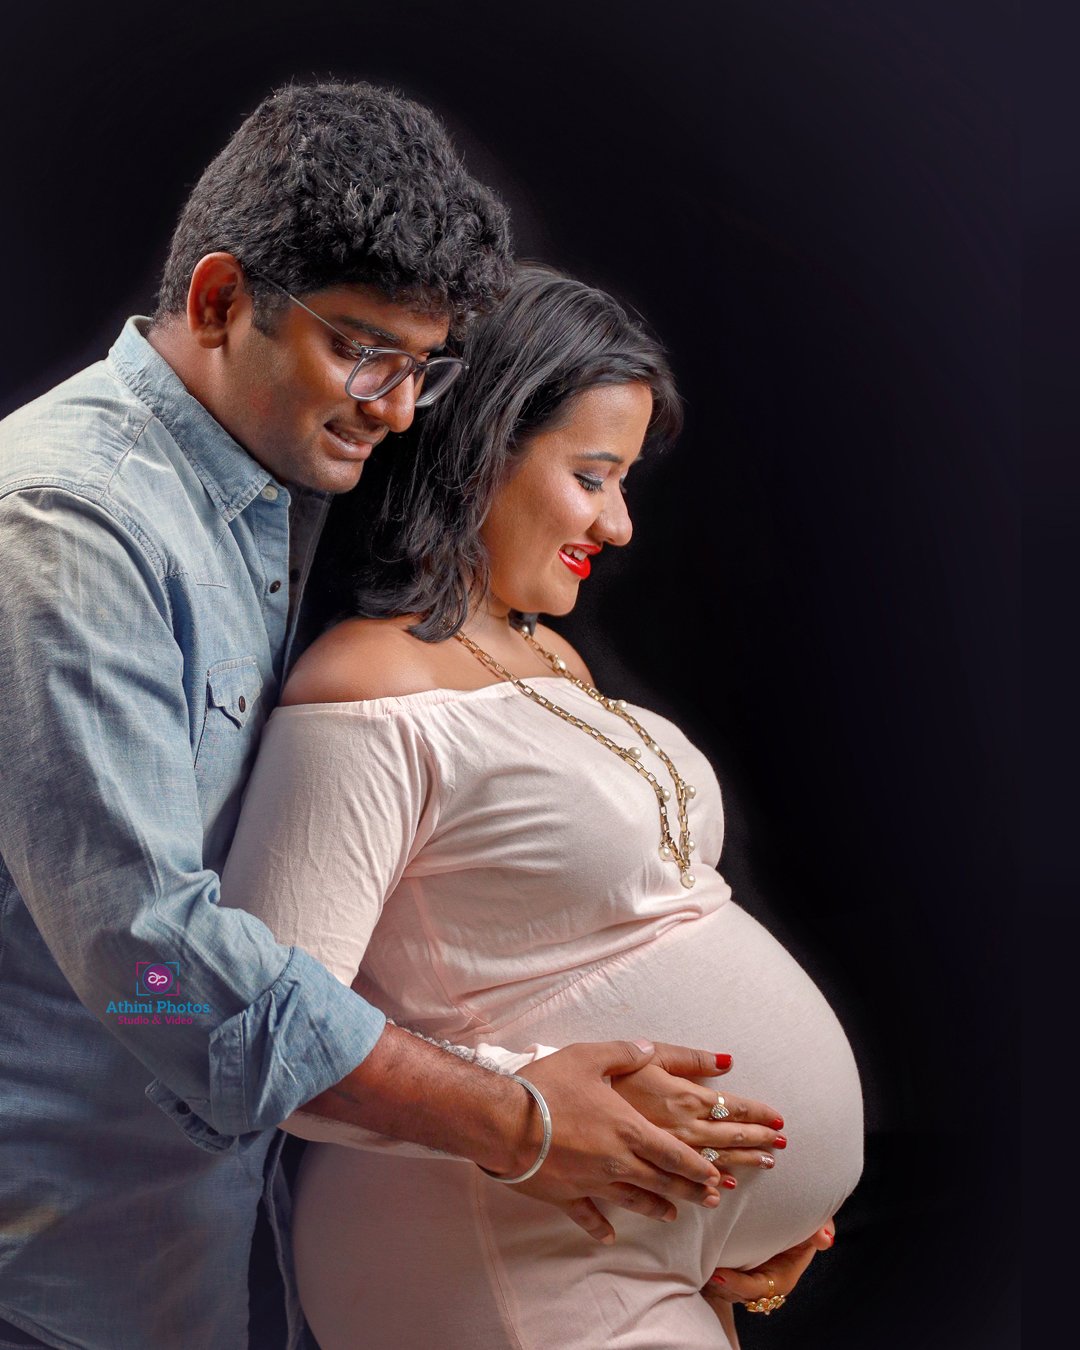 Baby Shower Photography Service at best price in Bhopal